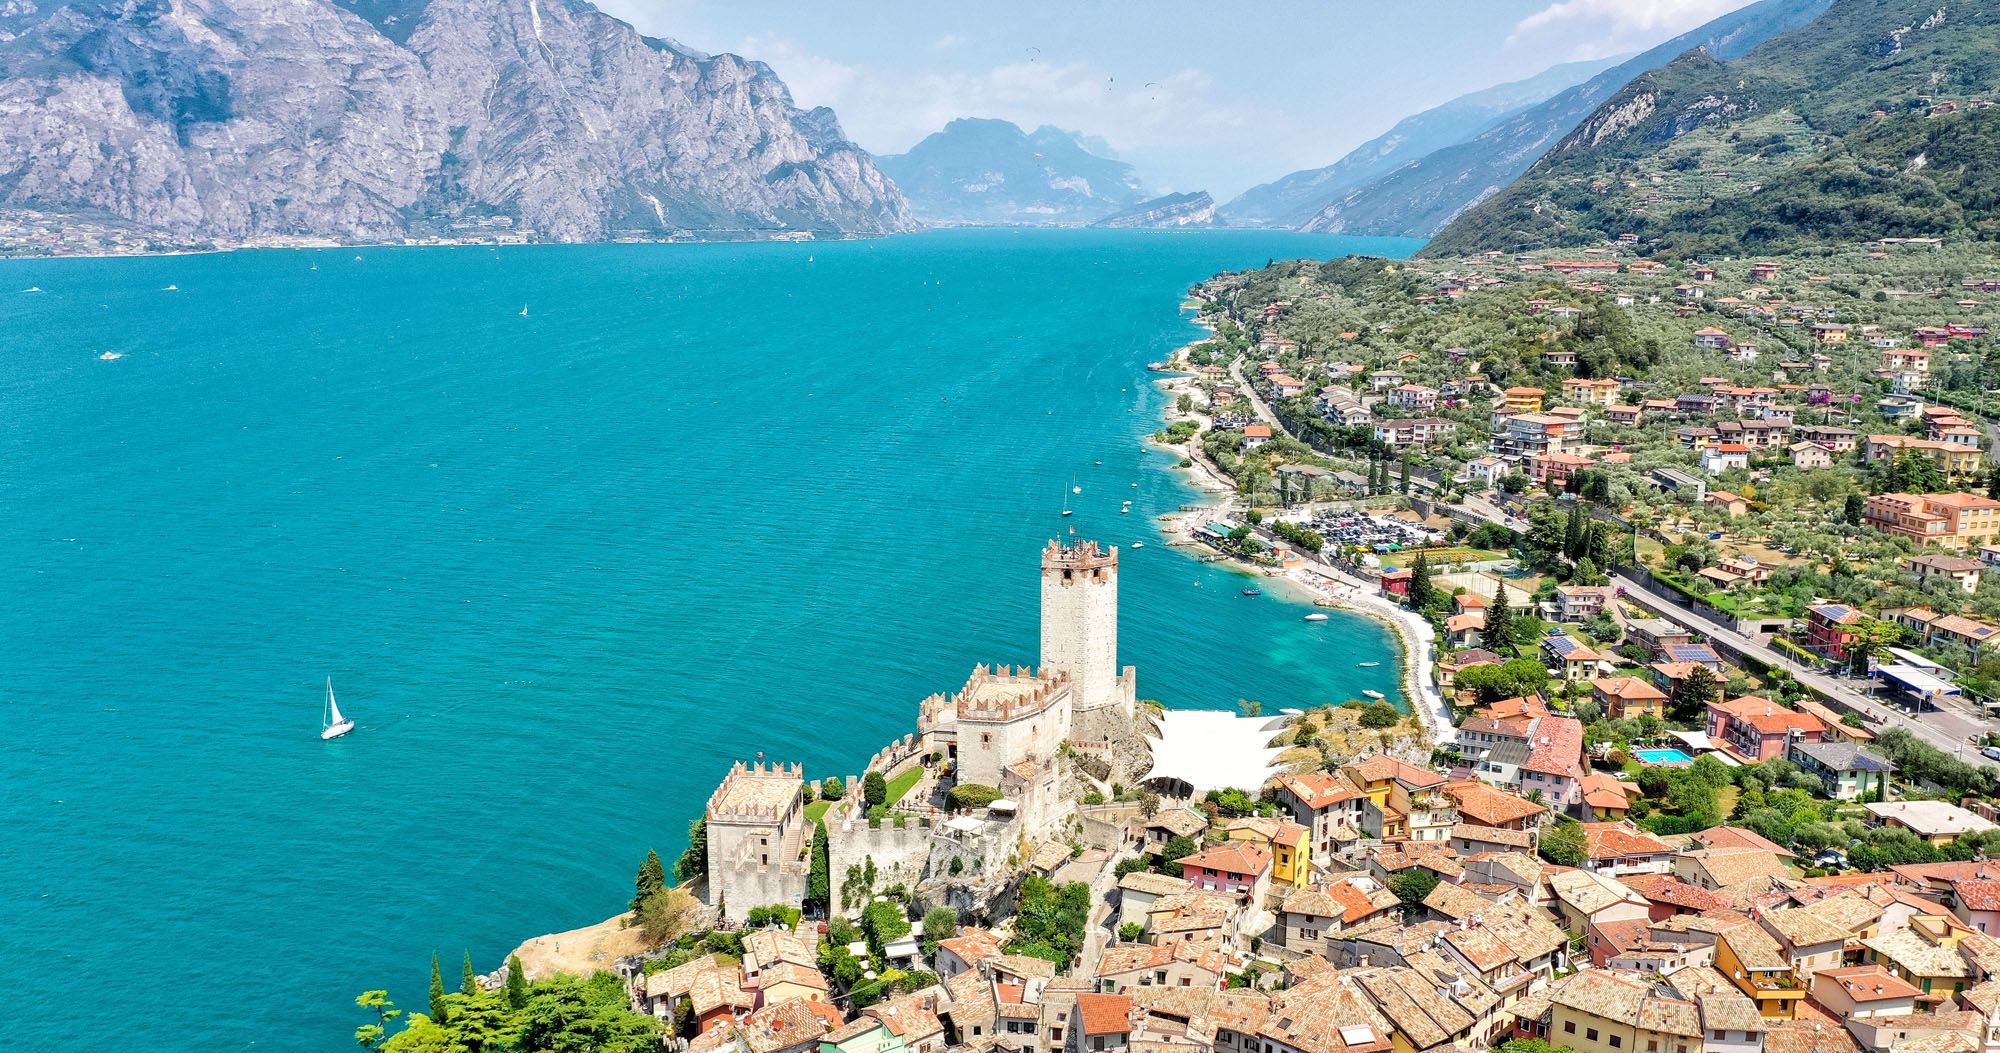 Lake Garda | Best places in Italy